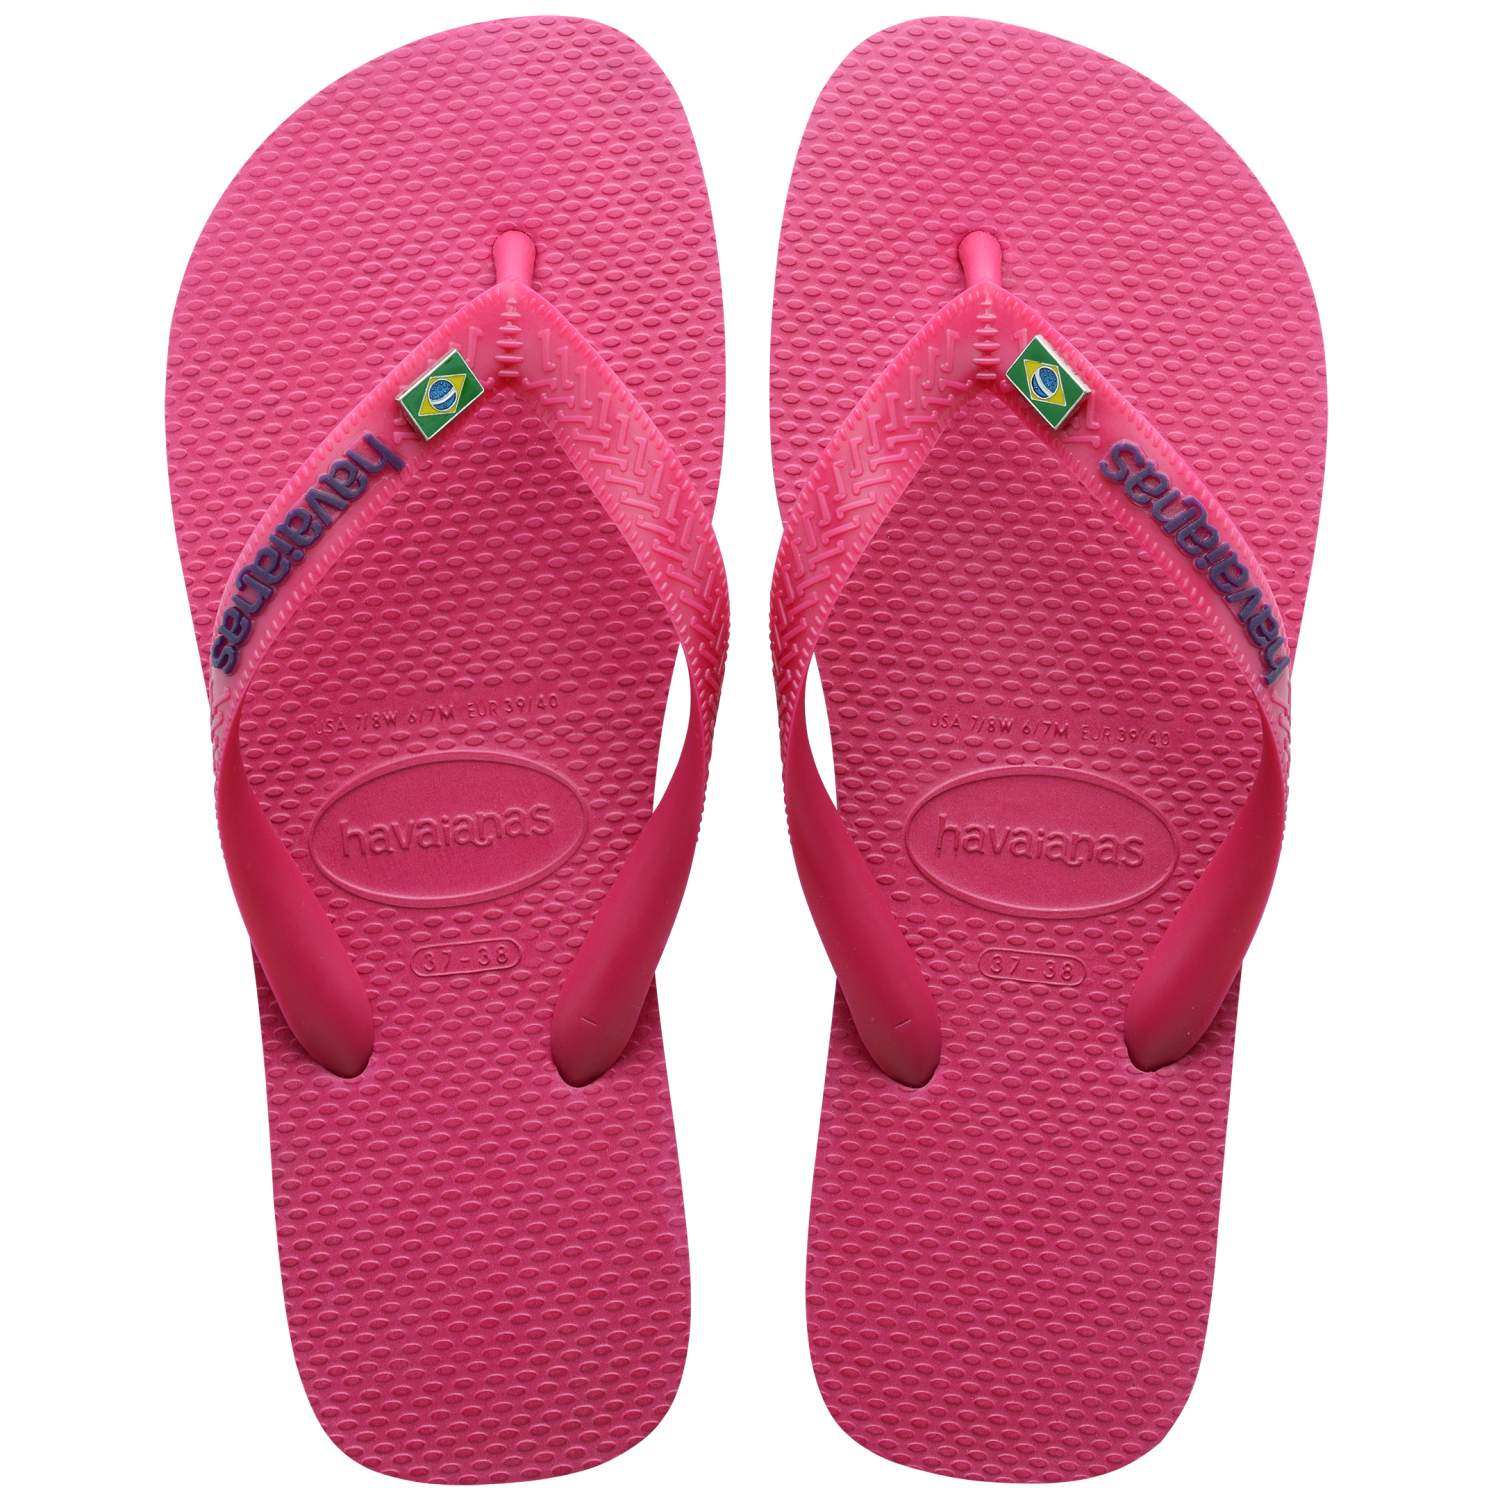 HAVAIANAS BRASIL LAYERS 4140715-8910 PINK | Topshoes.gr